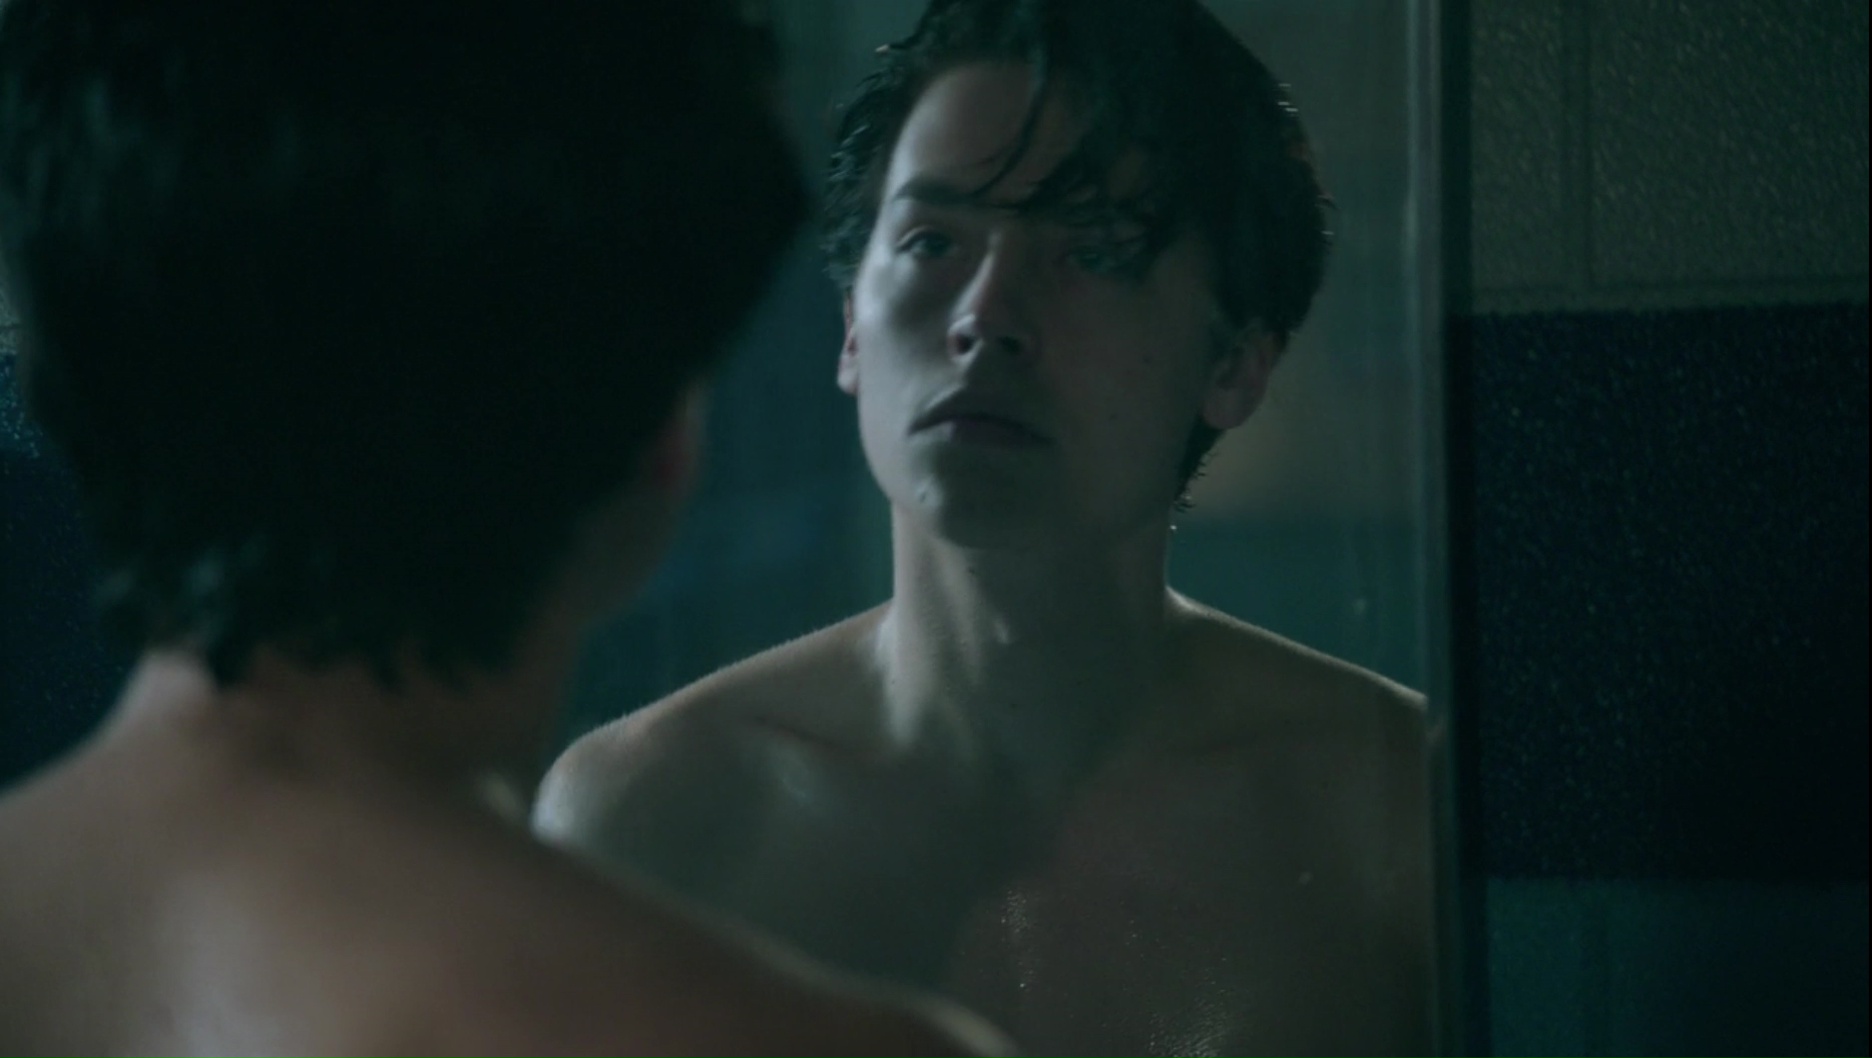 SEXY : Jughead, shirtless in Riverdale s1ep07 - Fringues de séries.